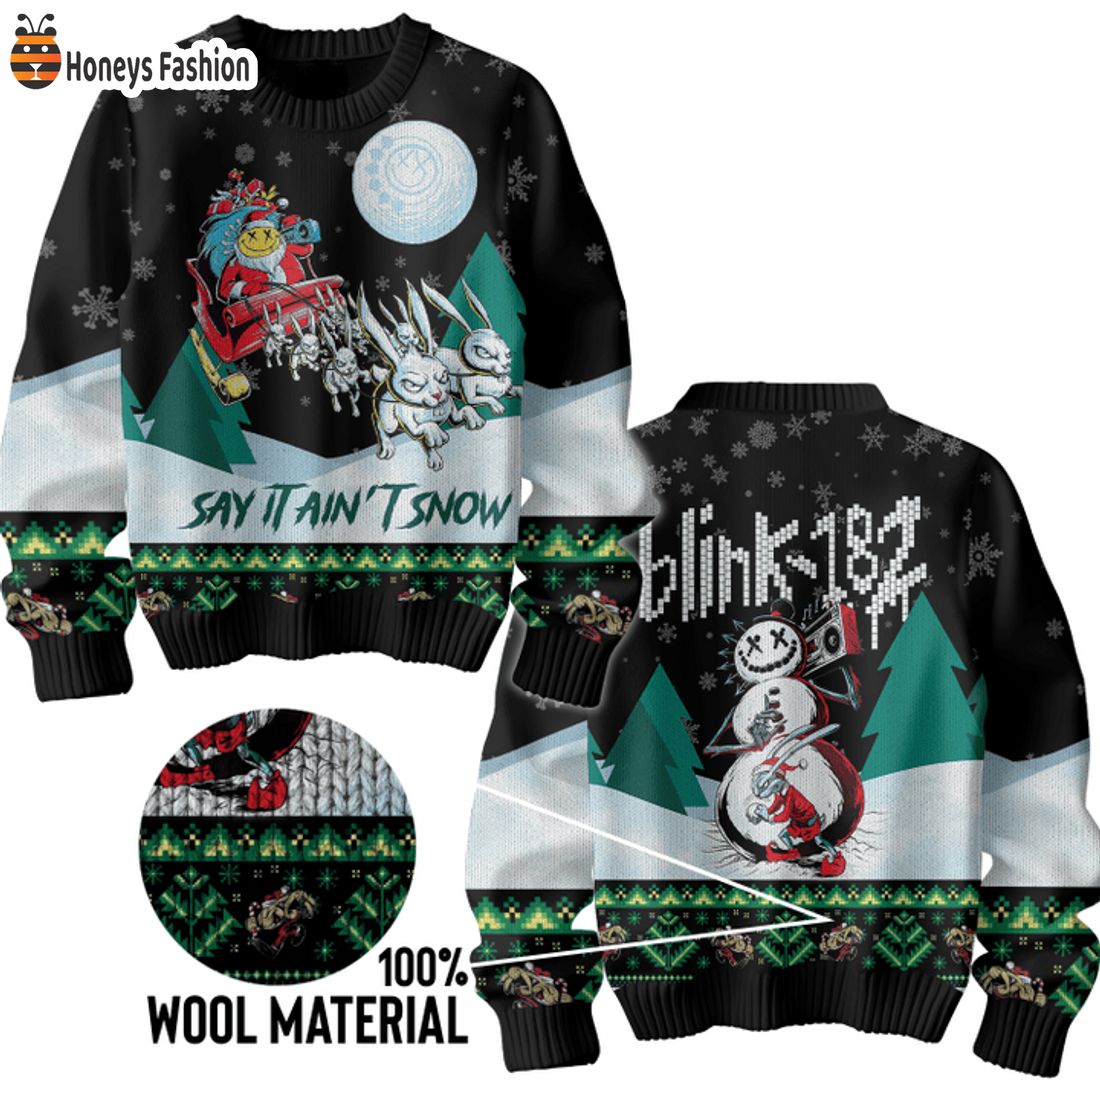 TOP Blink 182 Sat It Ain’t Snow Ugly Christmas Sweater